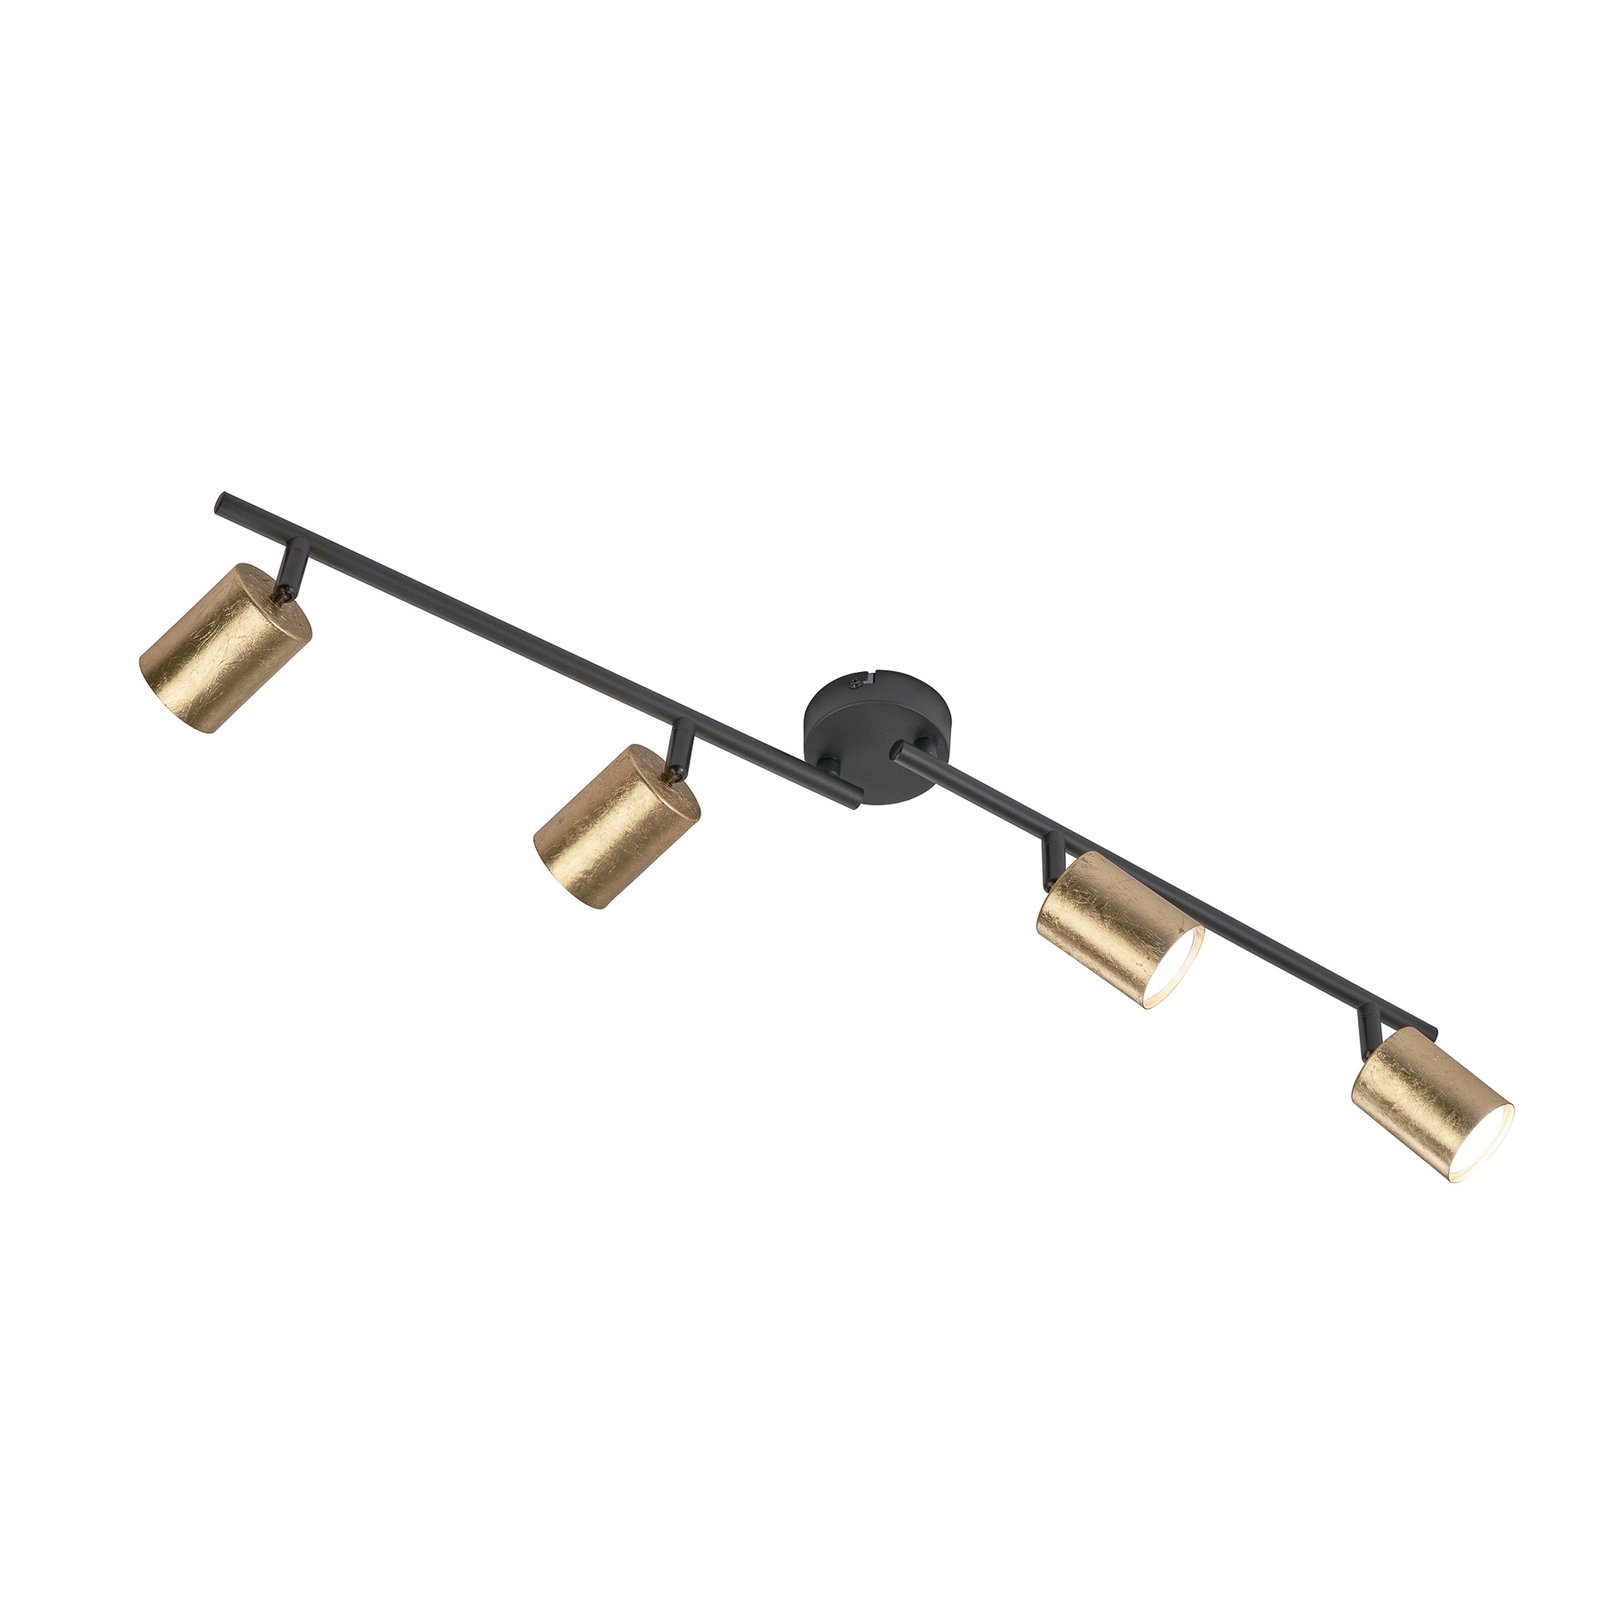 Spot plafond LED Vano feuille d’or, 4 lampes